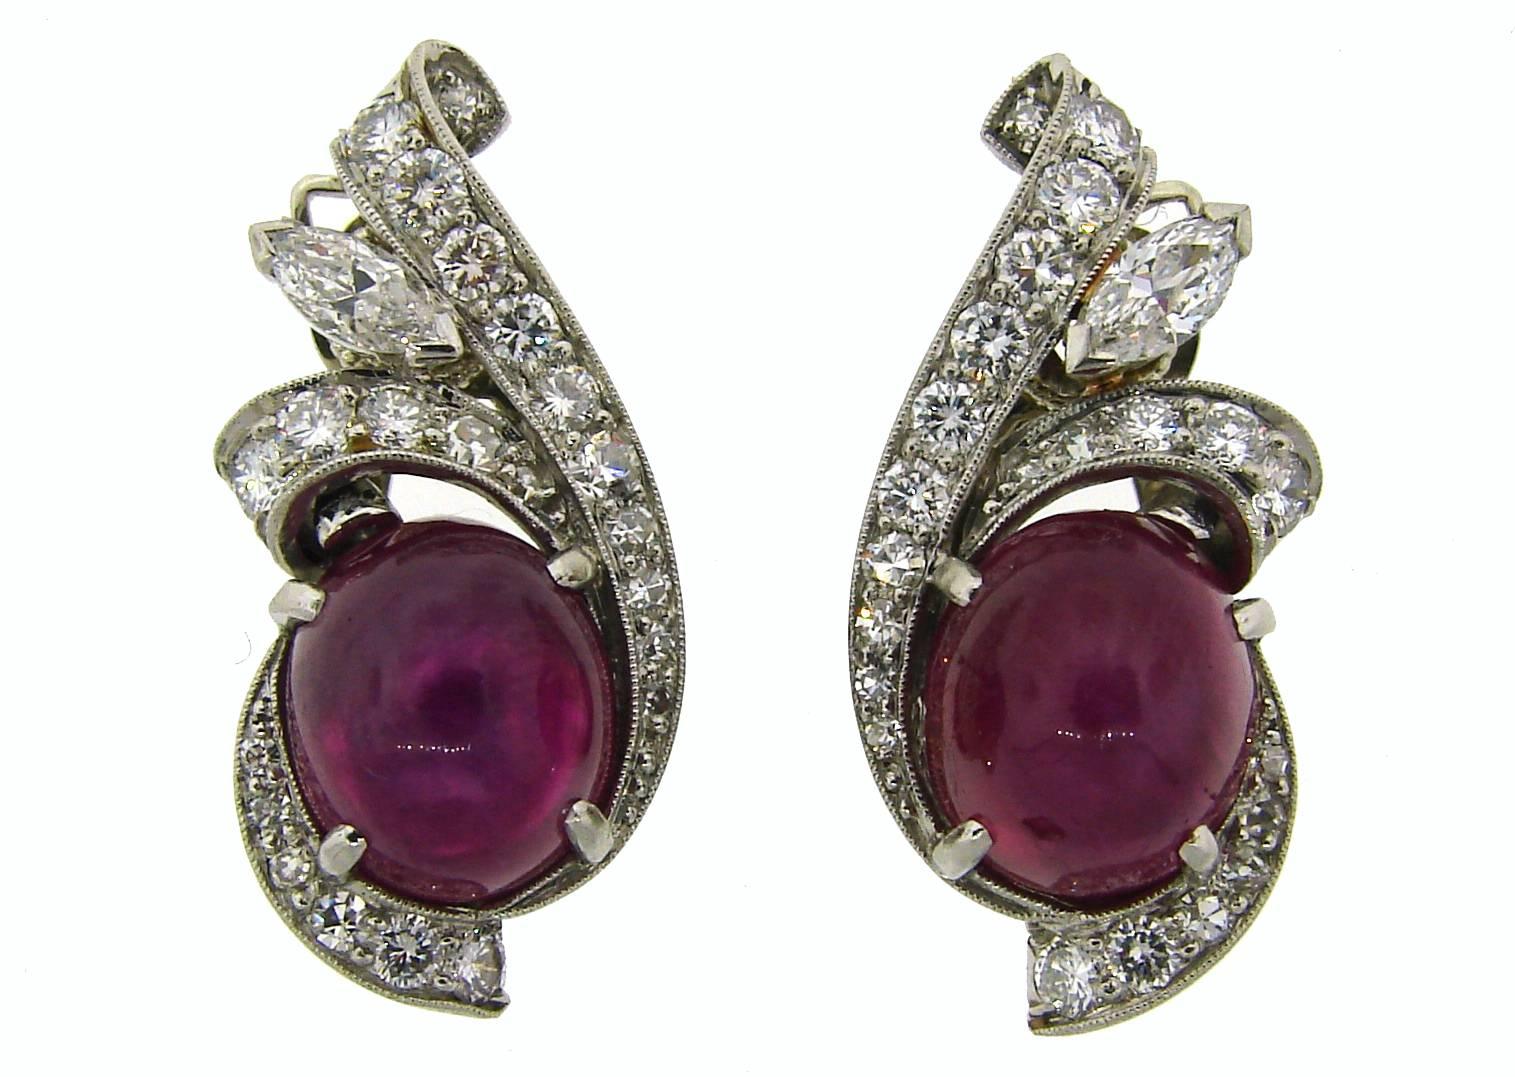 Classy and feminine Art Deco Revival earrings created in the 1960's. Feature a star ruby and diamonds set in platinum (tested). The earrings backs are made of 14k white gold (tested). The earrings are clip-on, posts can be added. 
The star rubies